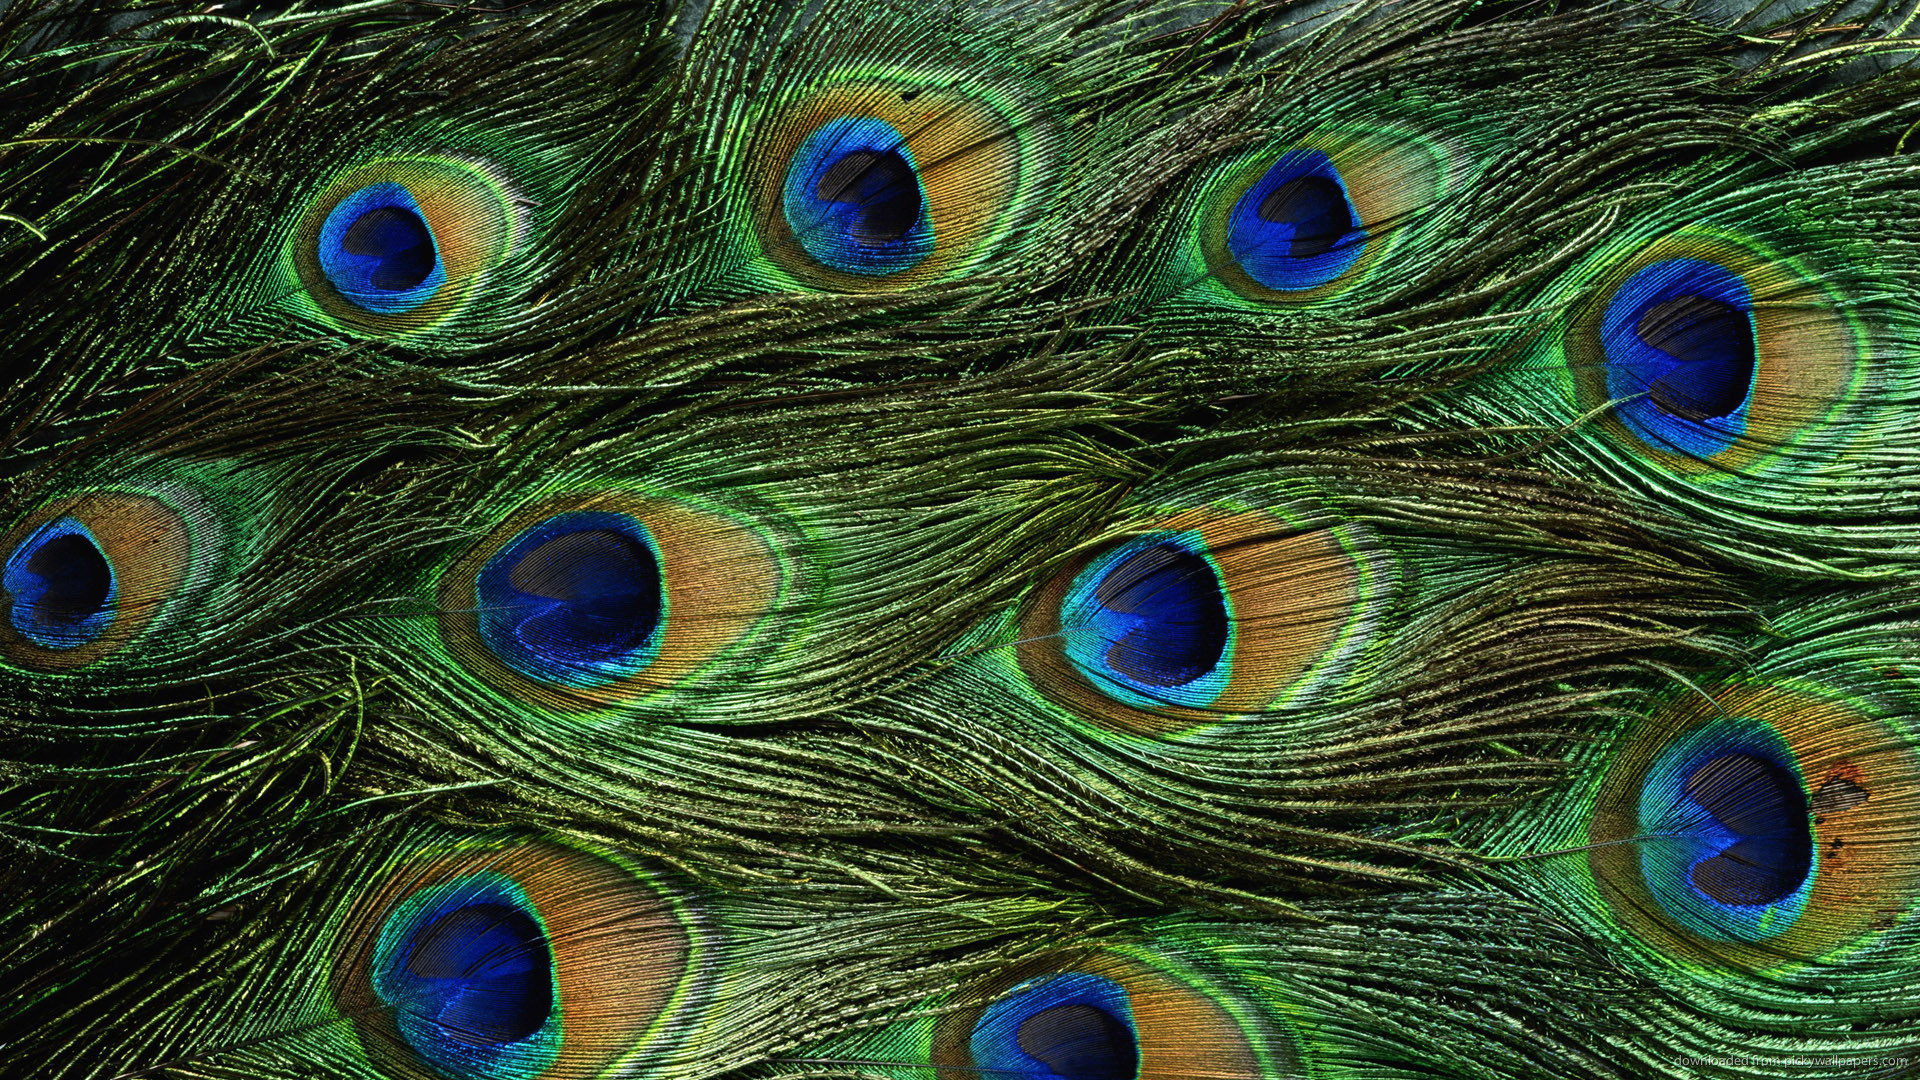 1920x1080 1024x600 Peacock Feathers wallpaper